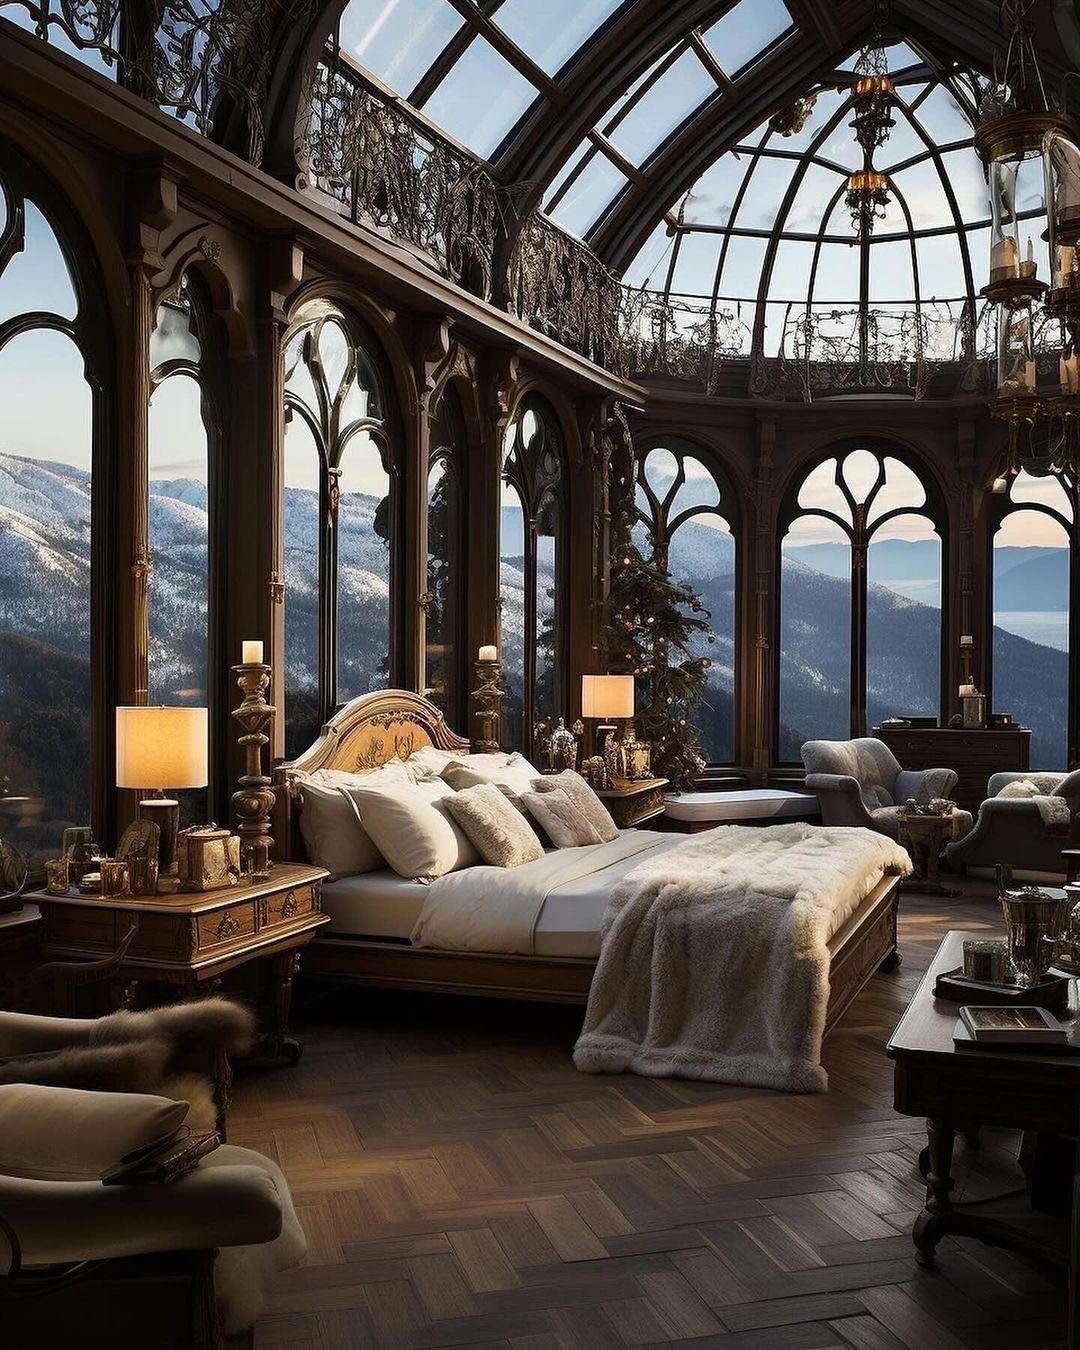 Gothic Style Home Master bedroom with catheral windows